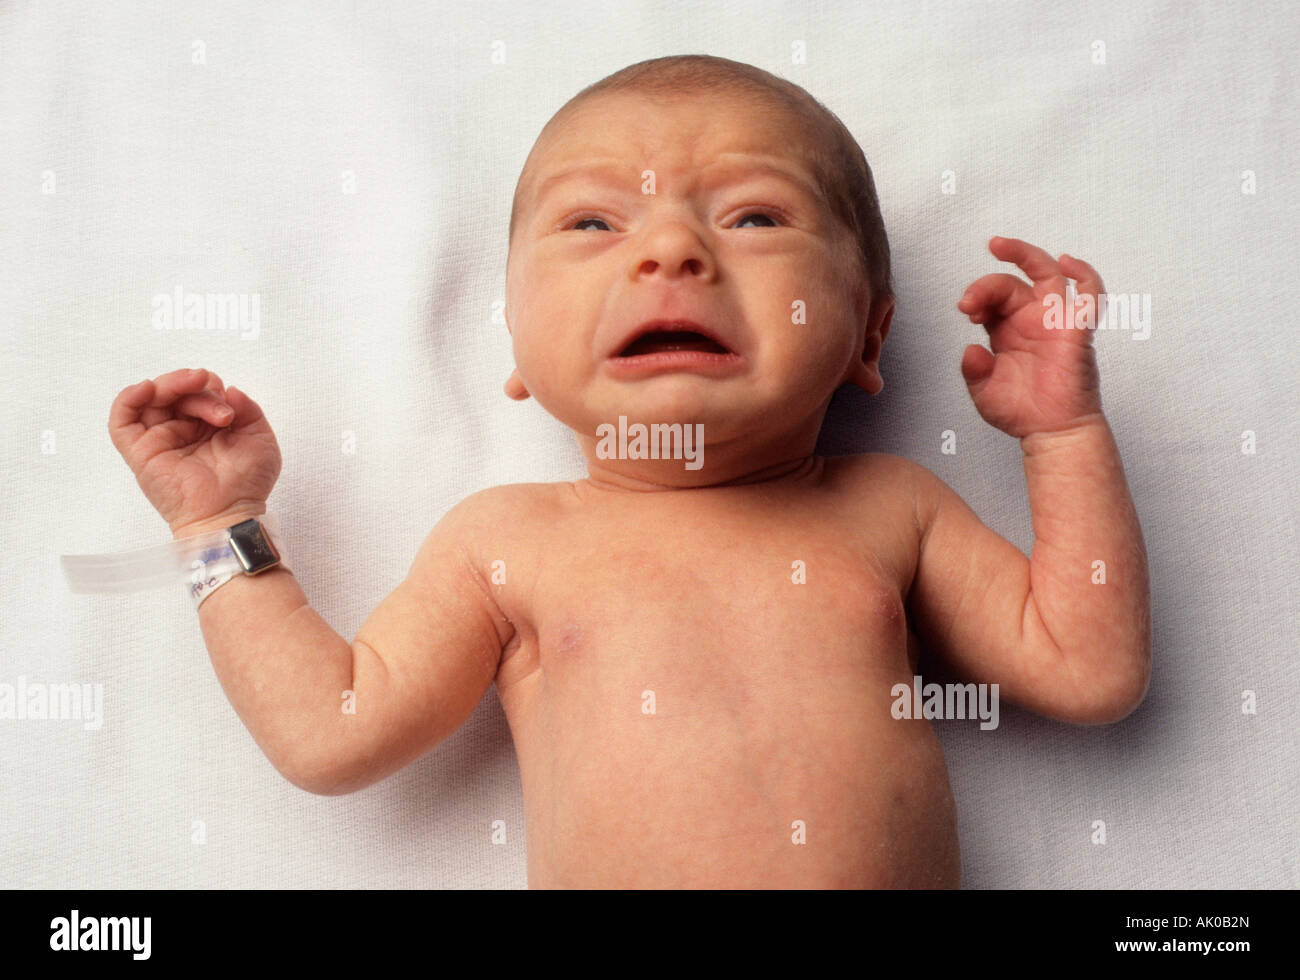 Newborn caucasian infant baby 10 day old with identification braclet Stock Photo